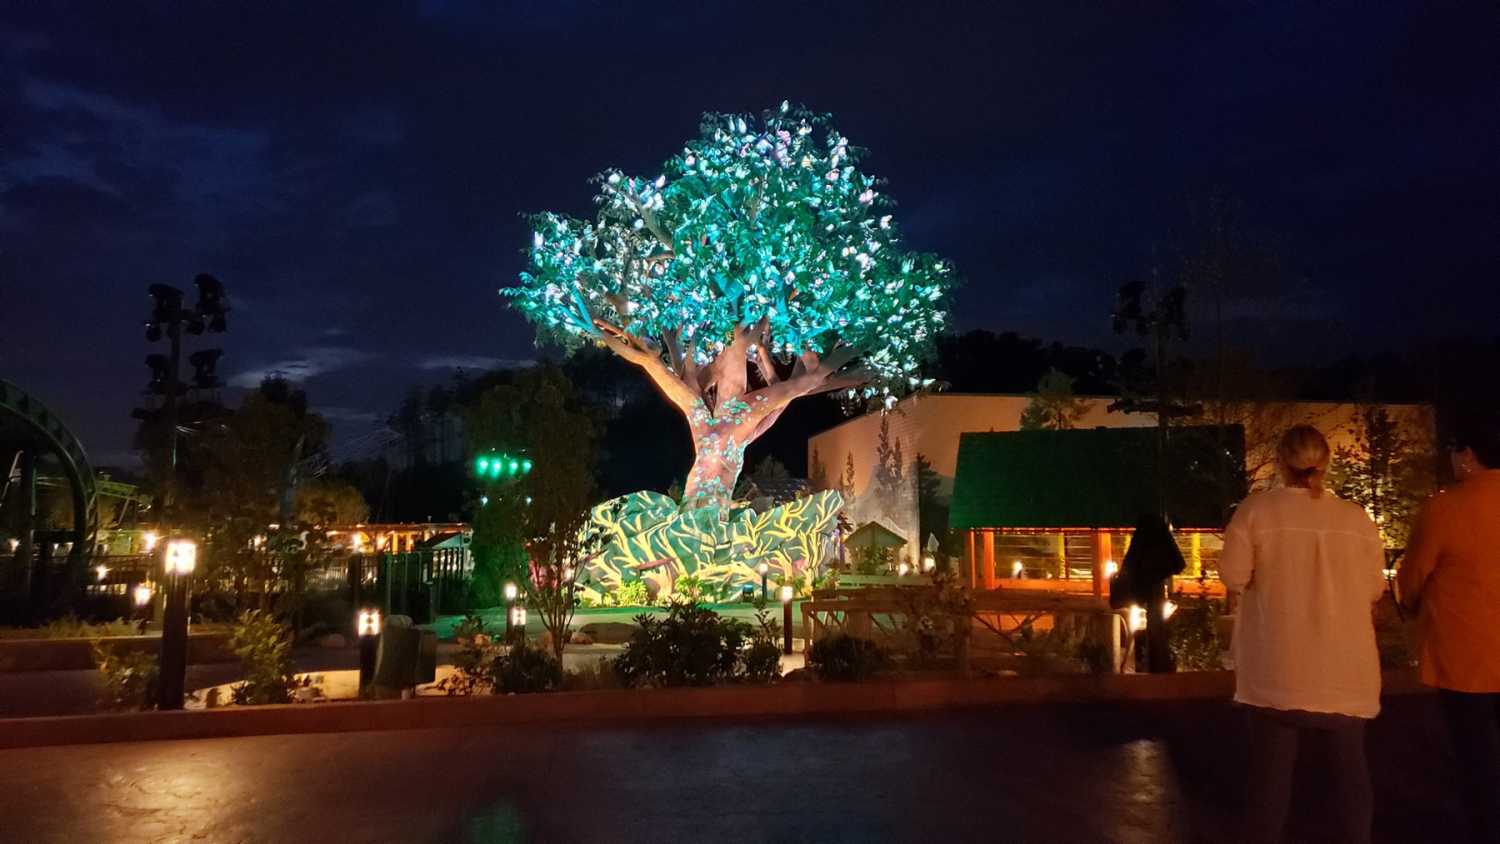 The Wildwood Tree comes to life each evening during a light and sound experience created by The Imagination House